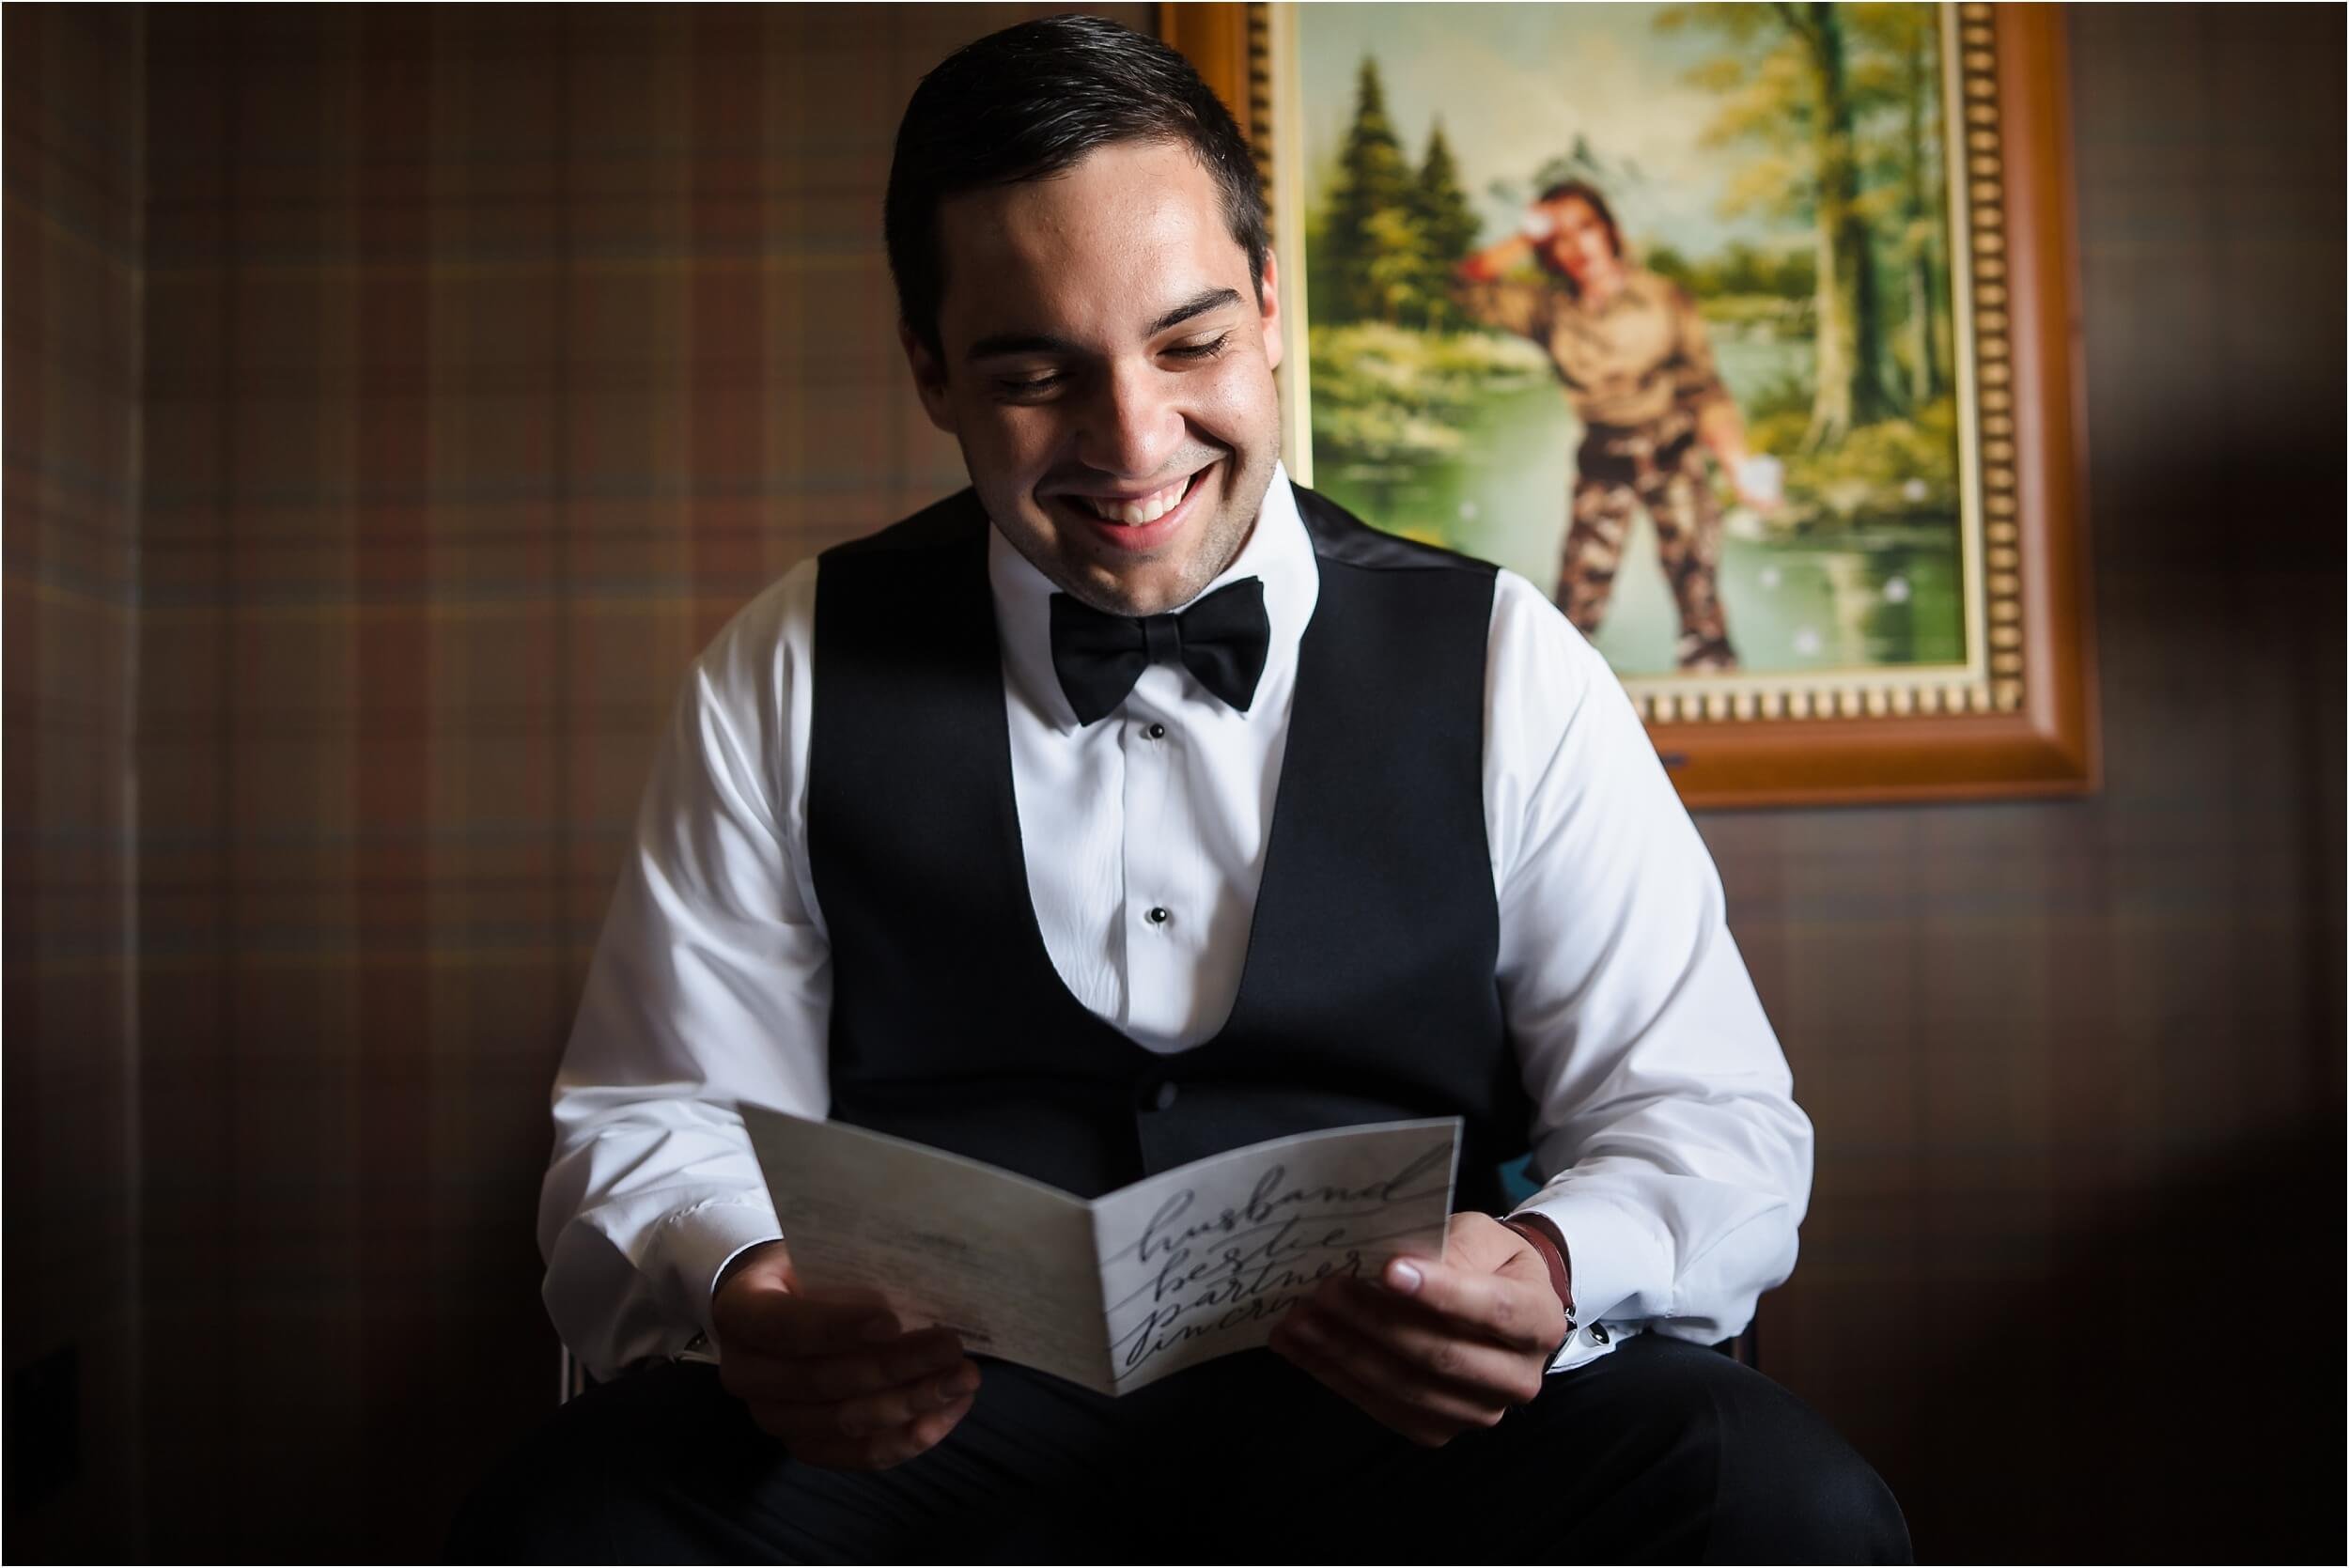  A groom opens up a note from his bride on the morning of his wedding in a downtown Ann Arbor wedding.  